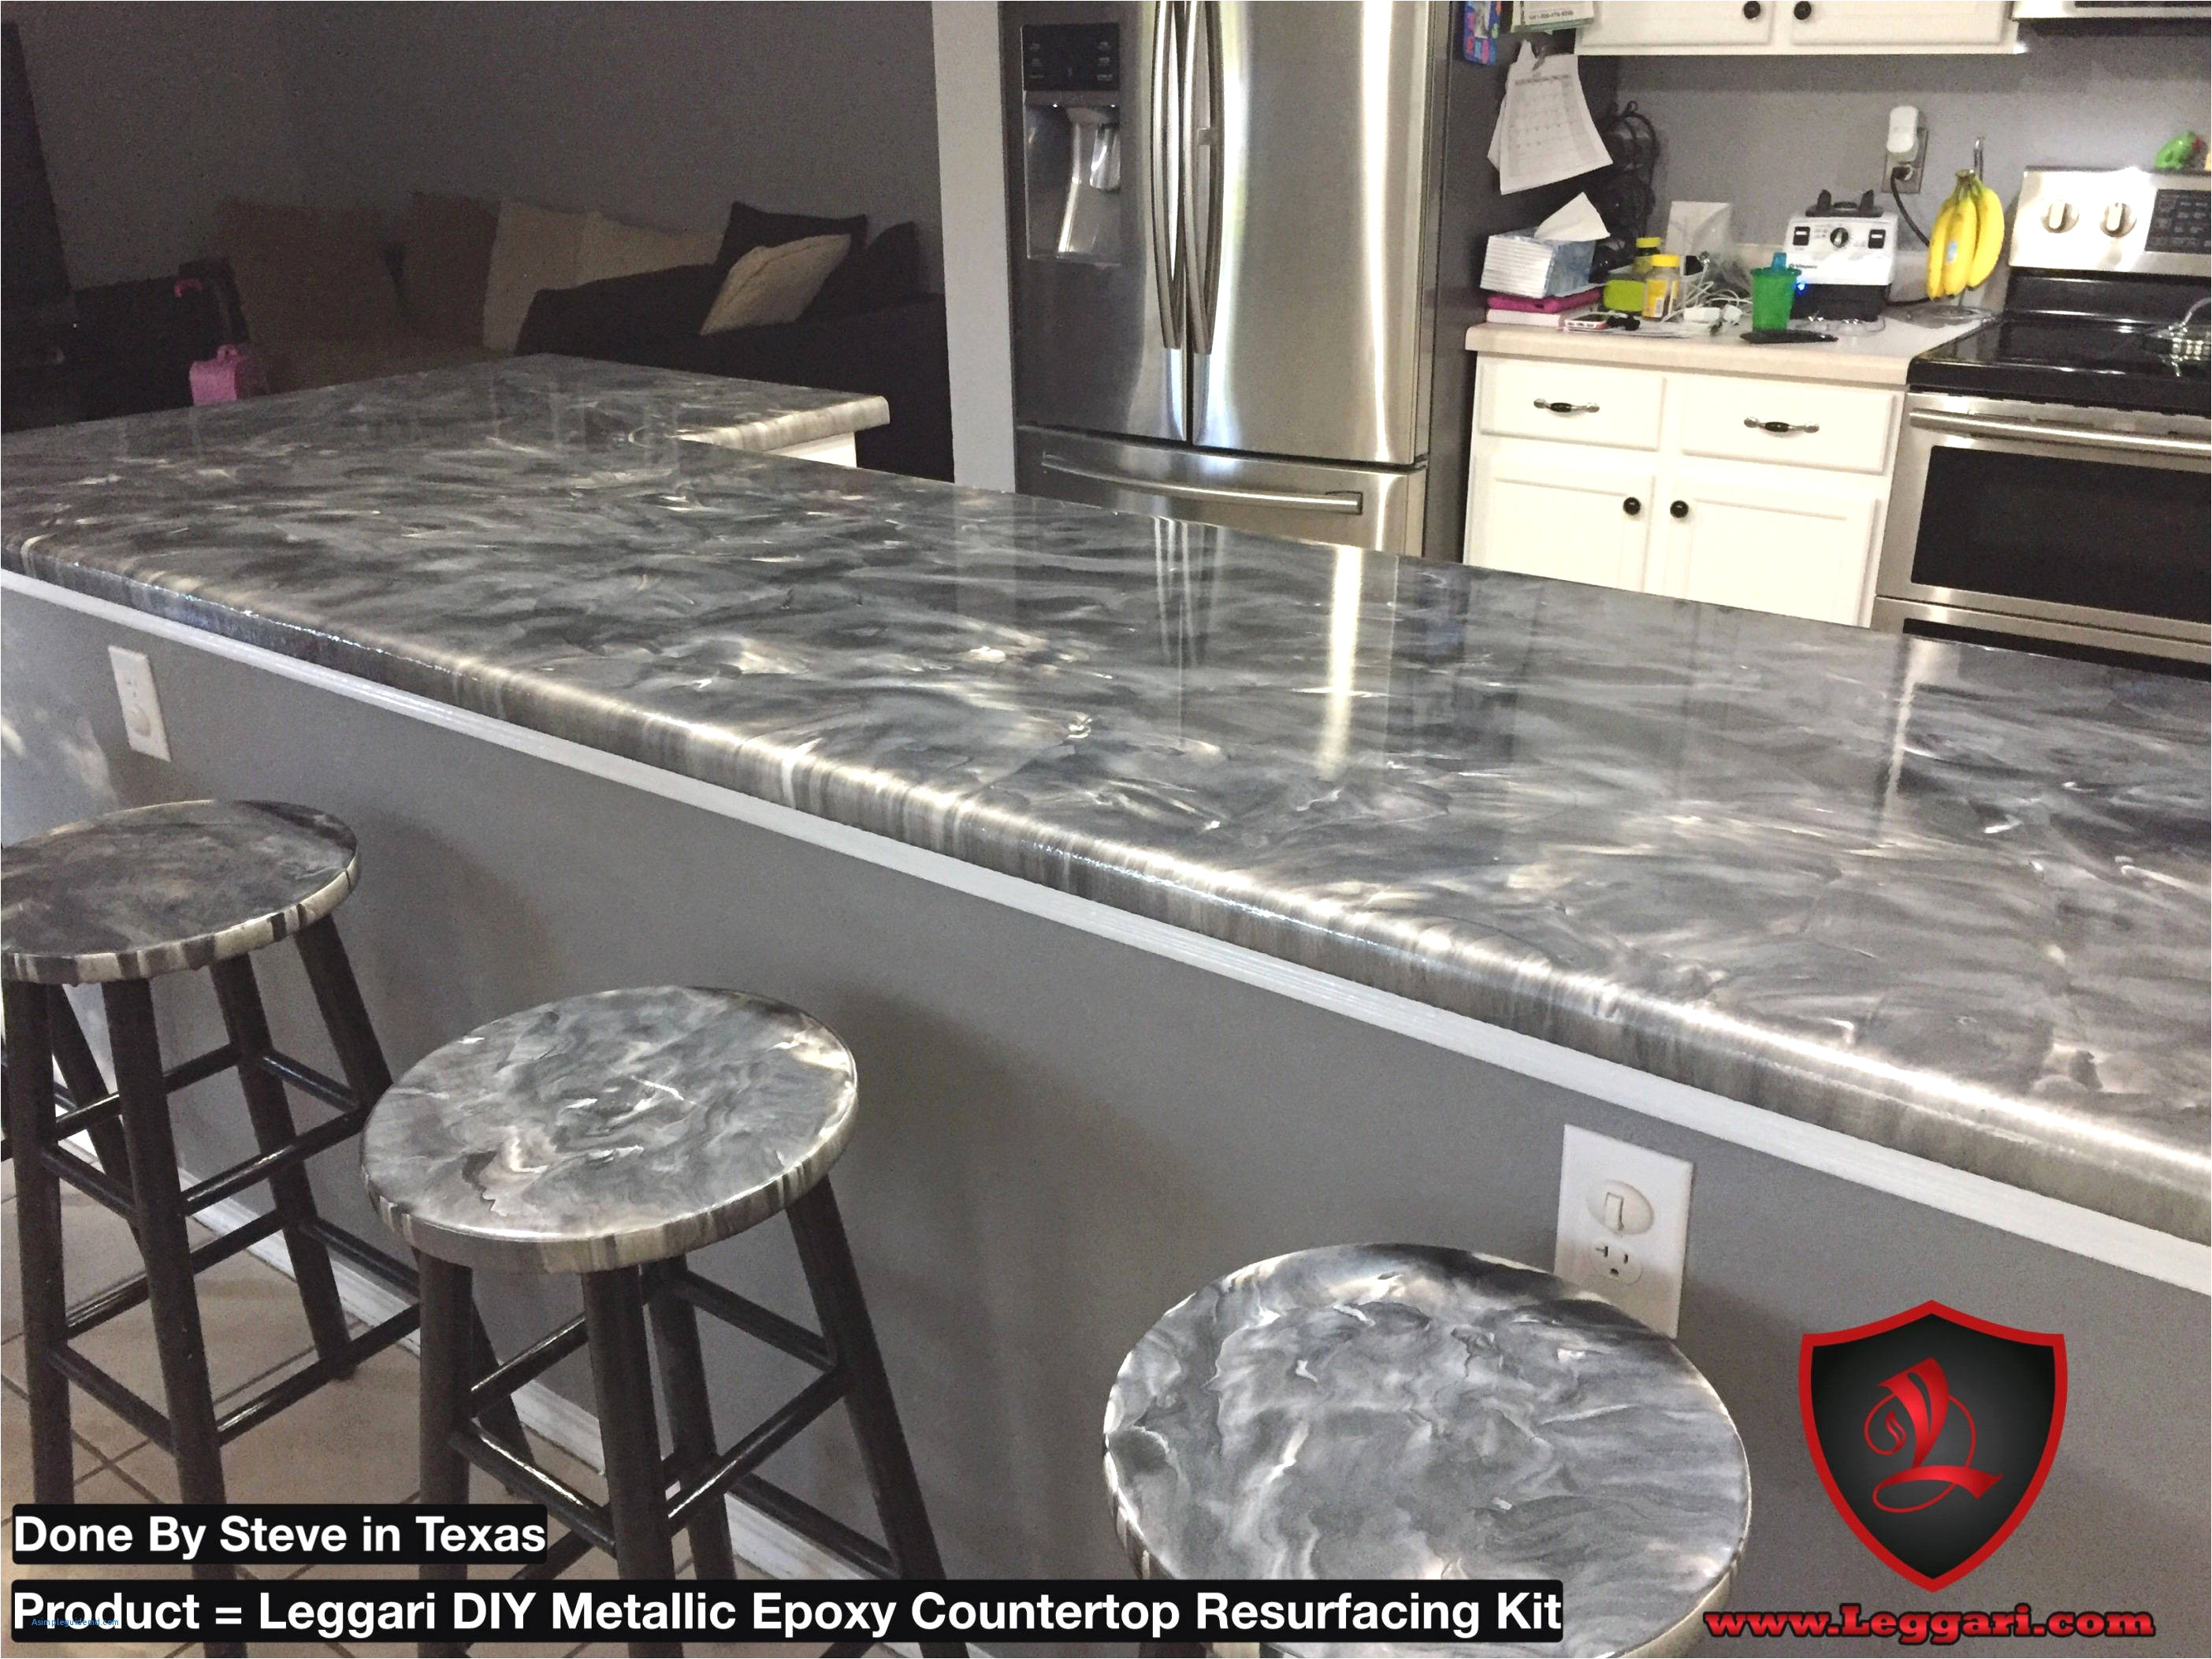 epoxy for granite countertops awesome diy granite countertops kits best modular granite countertops